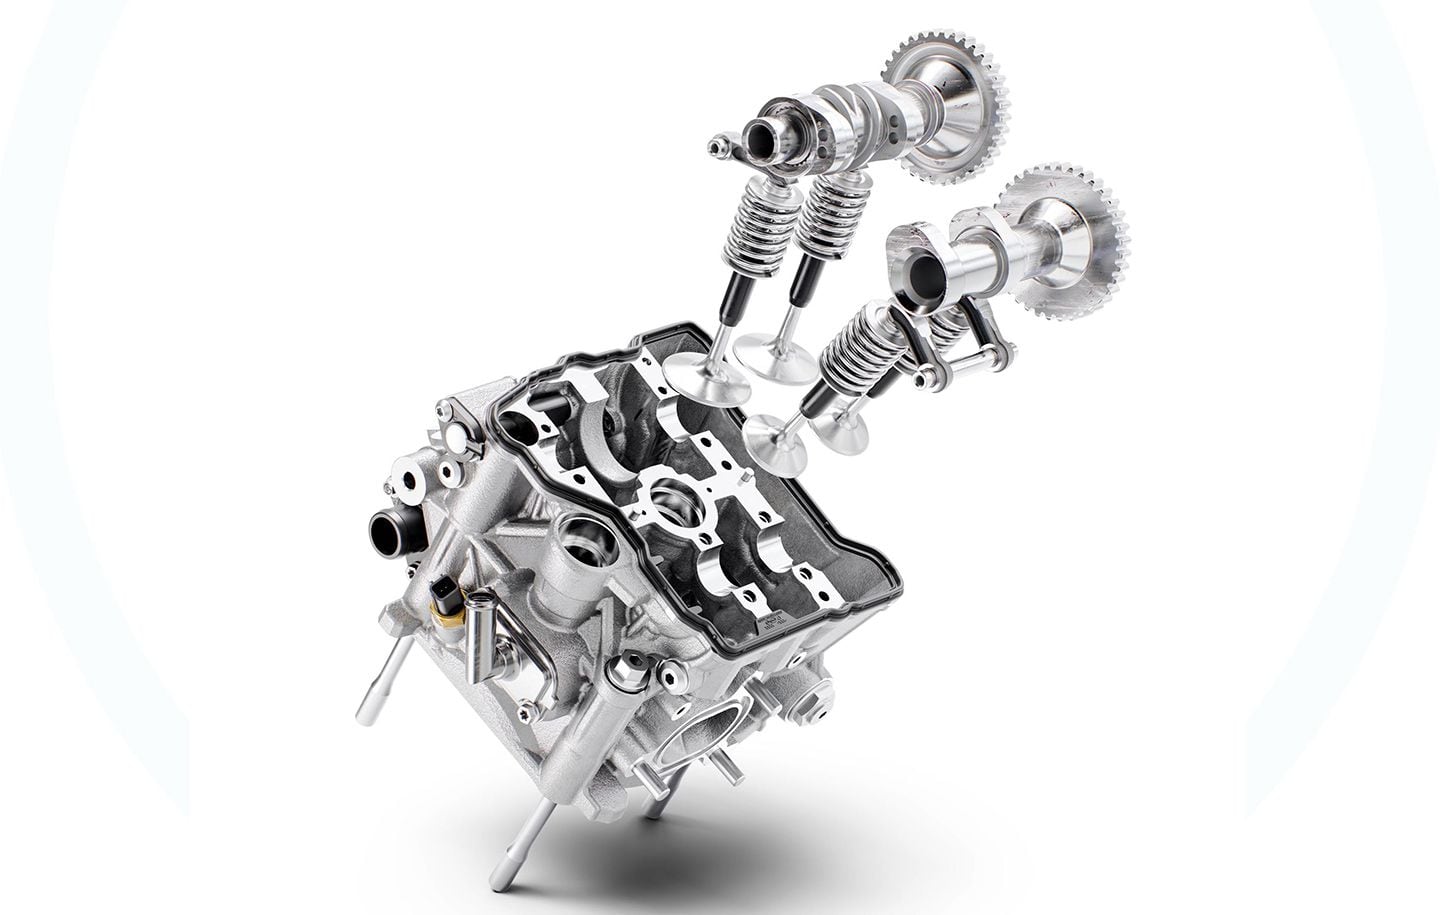 KTM’s camshaft technology works on the intake side. The electronically actuated system switches from a mild cam lobe to a more aggressive lobe just below 6,000 rpm.